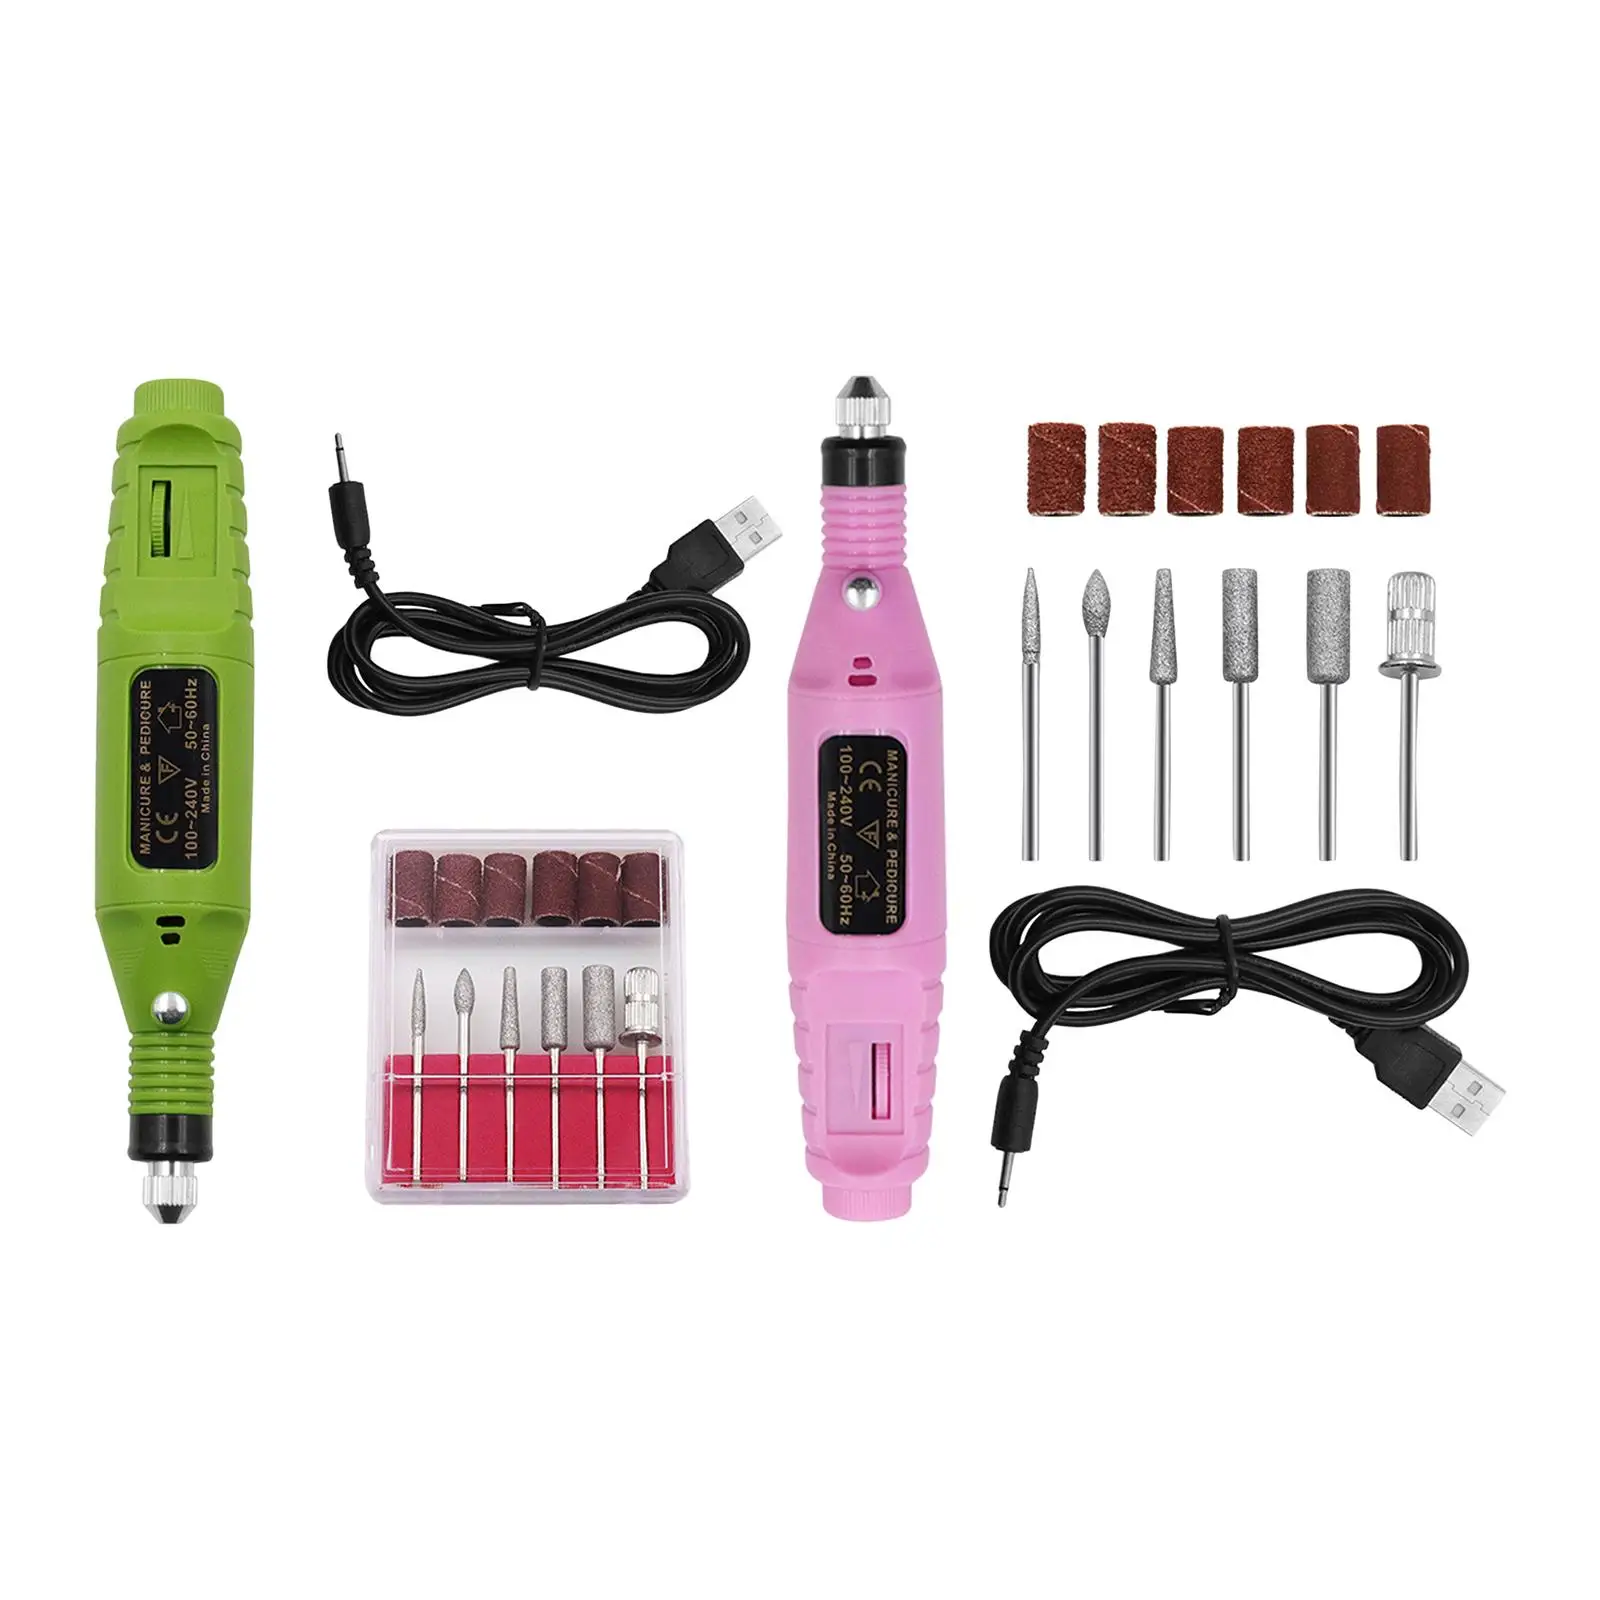 2000RPM Nail Drill Pen Sander Changeable Drills for Polishing Nail Removing Engraving